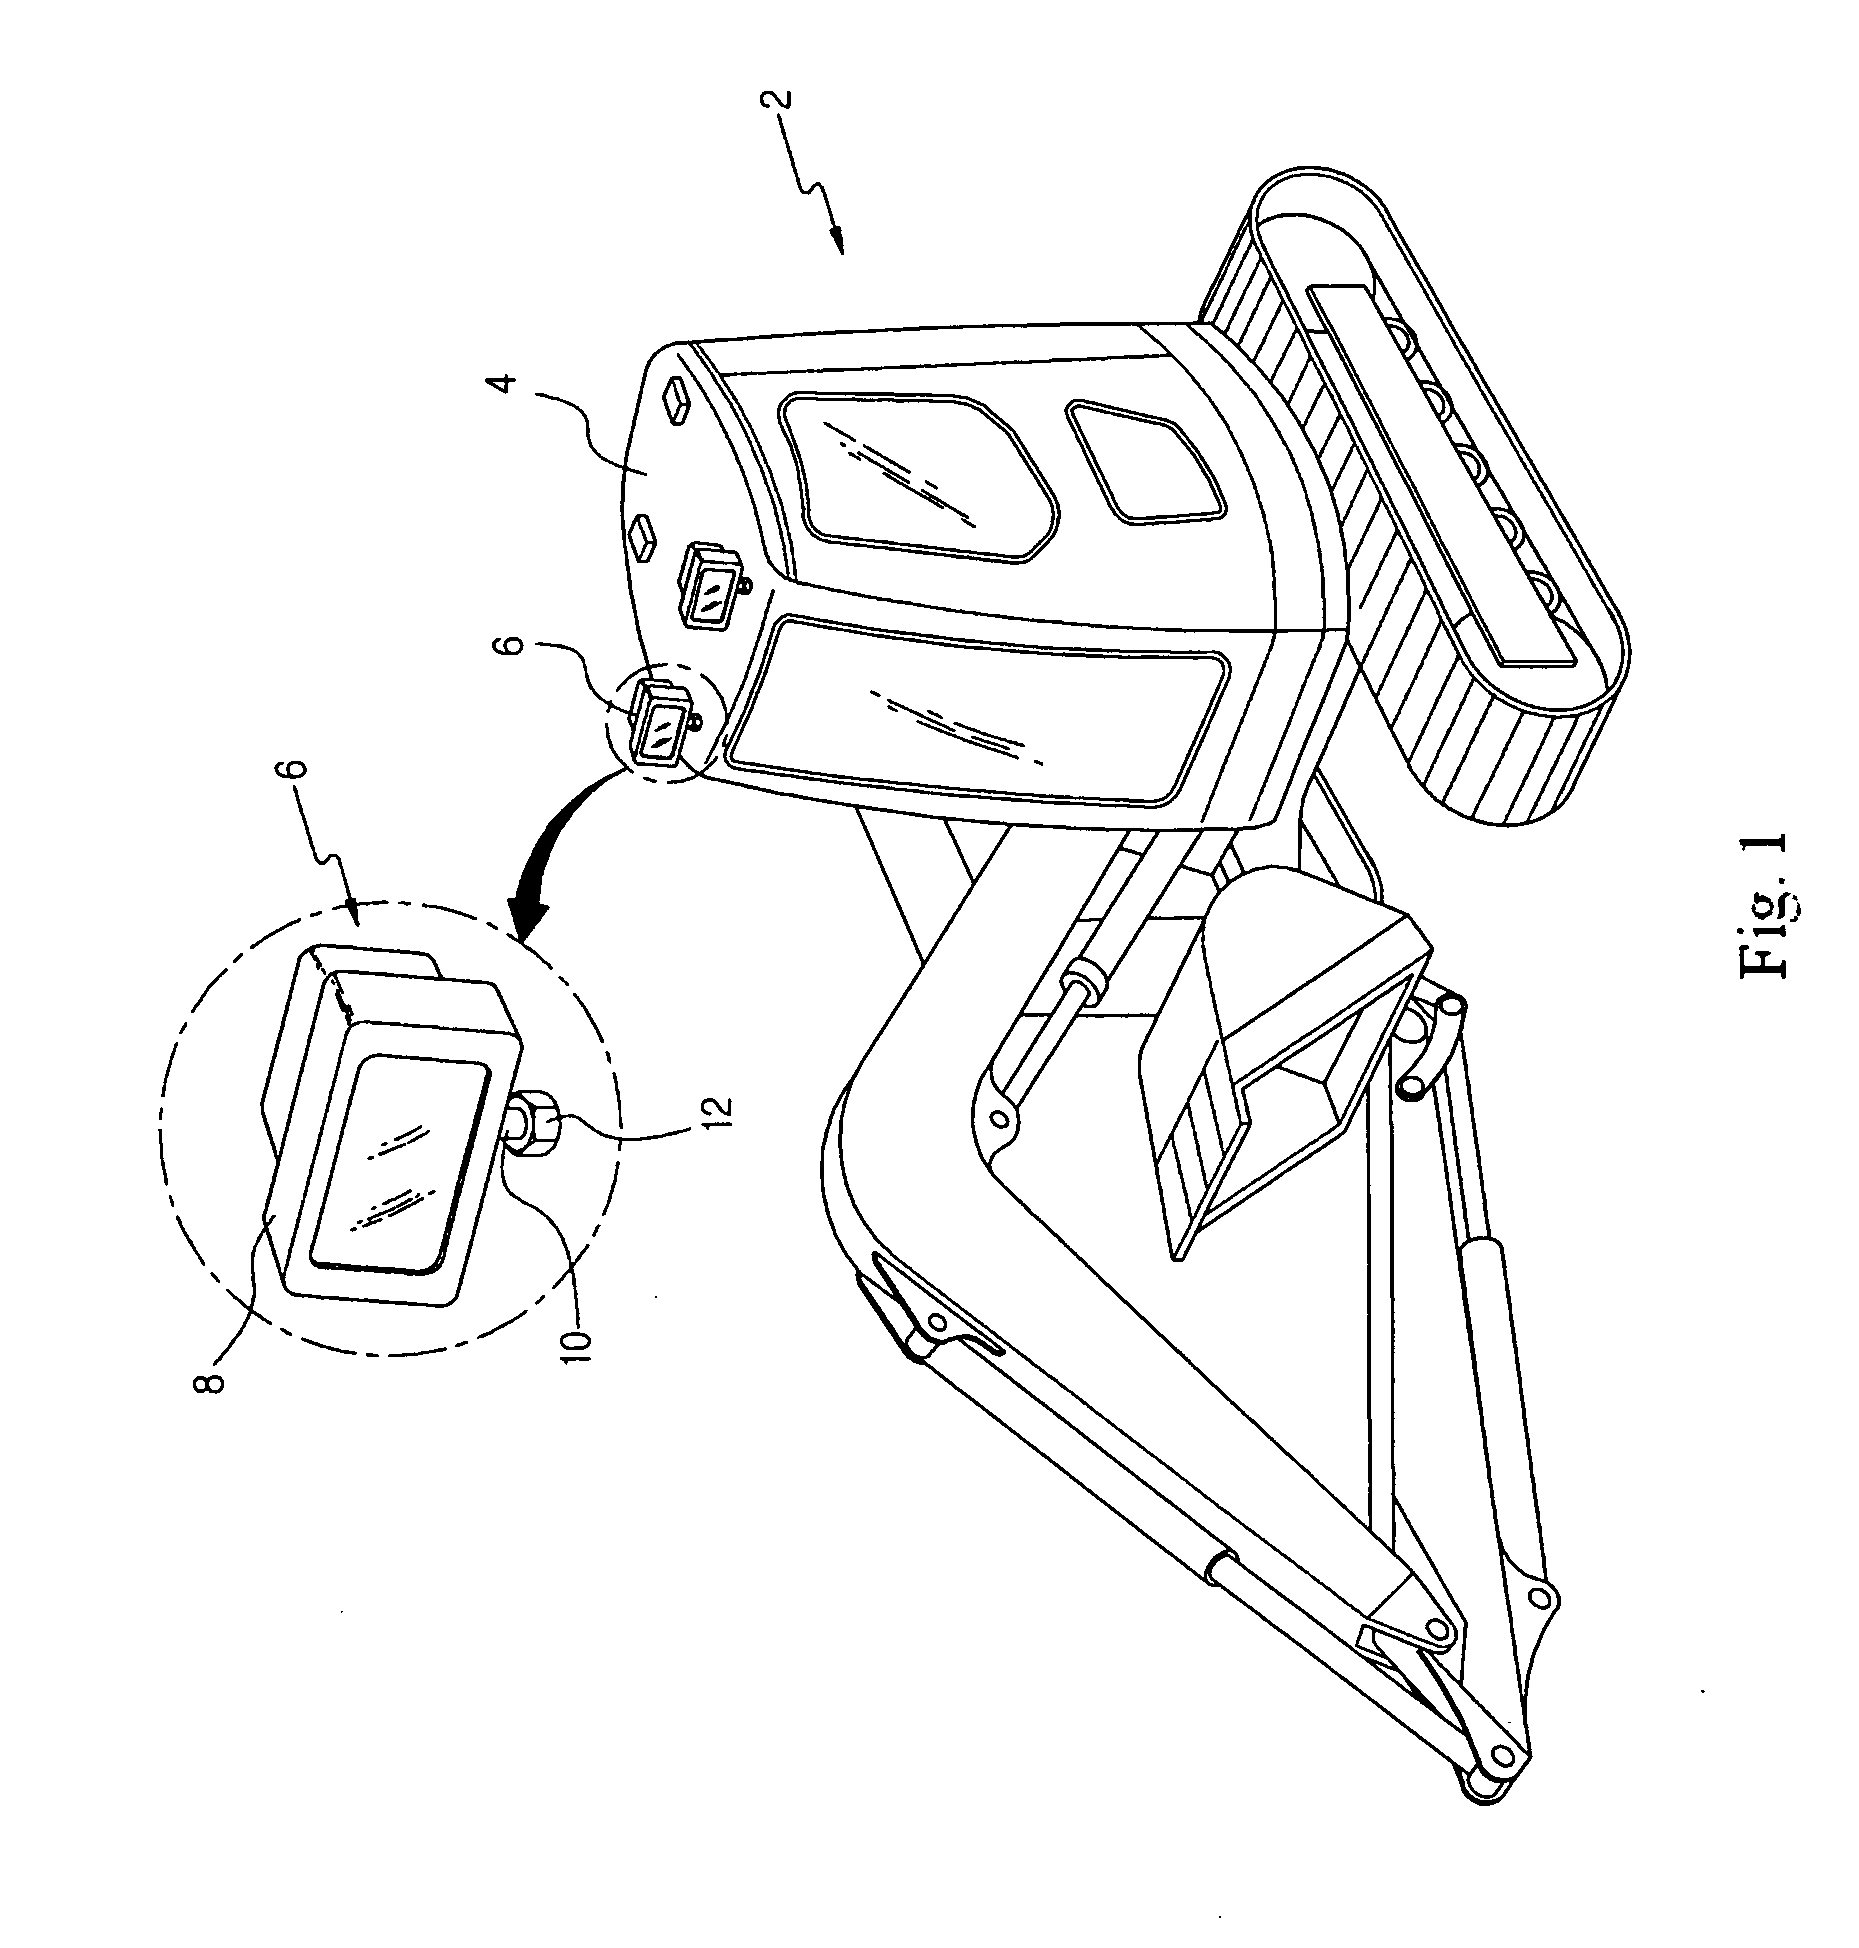 Structure of overhead lamp and mounting bracket for constructional vehicle